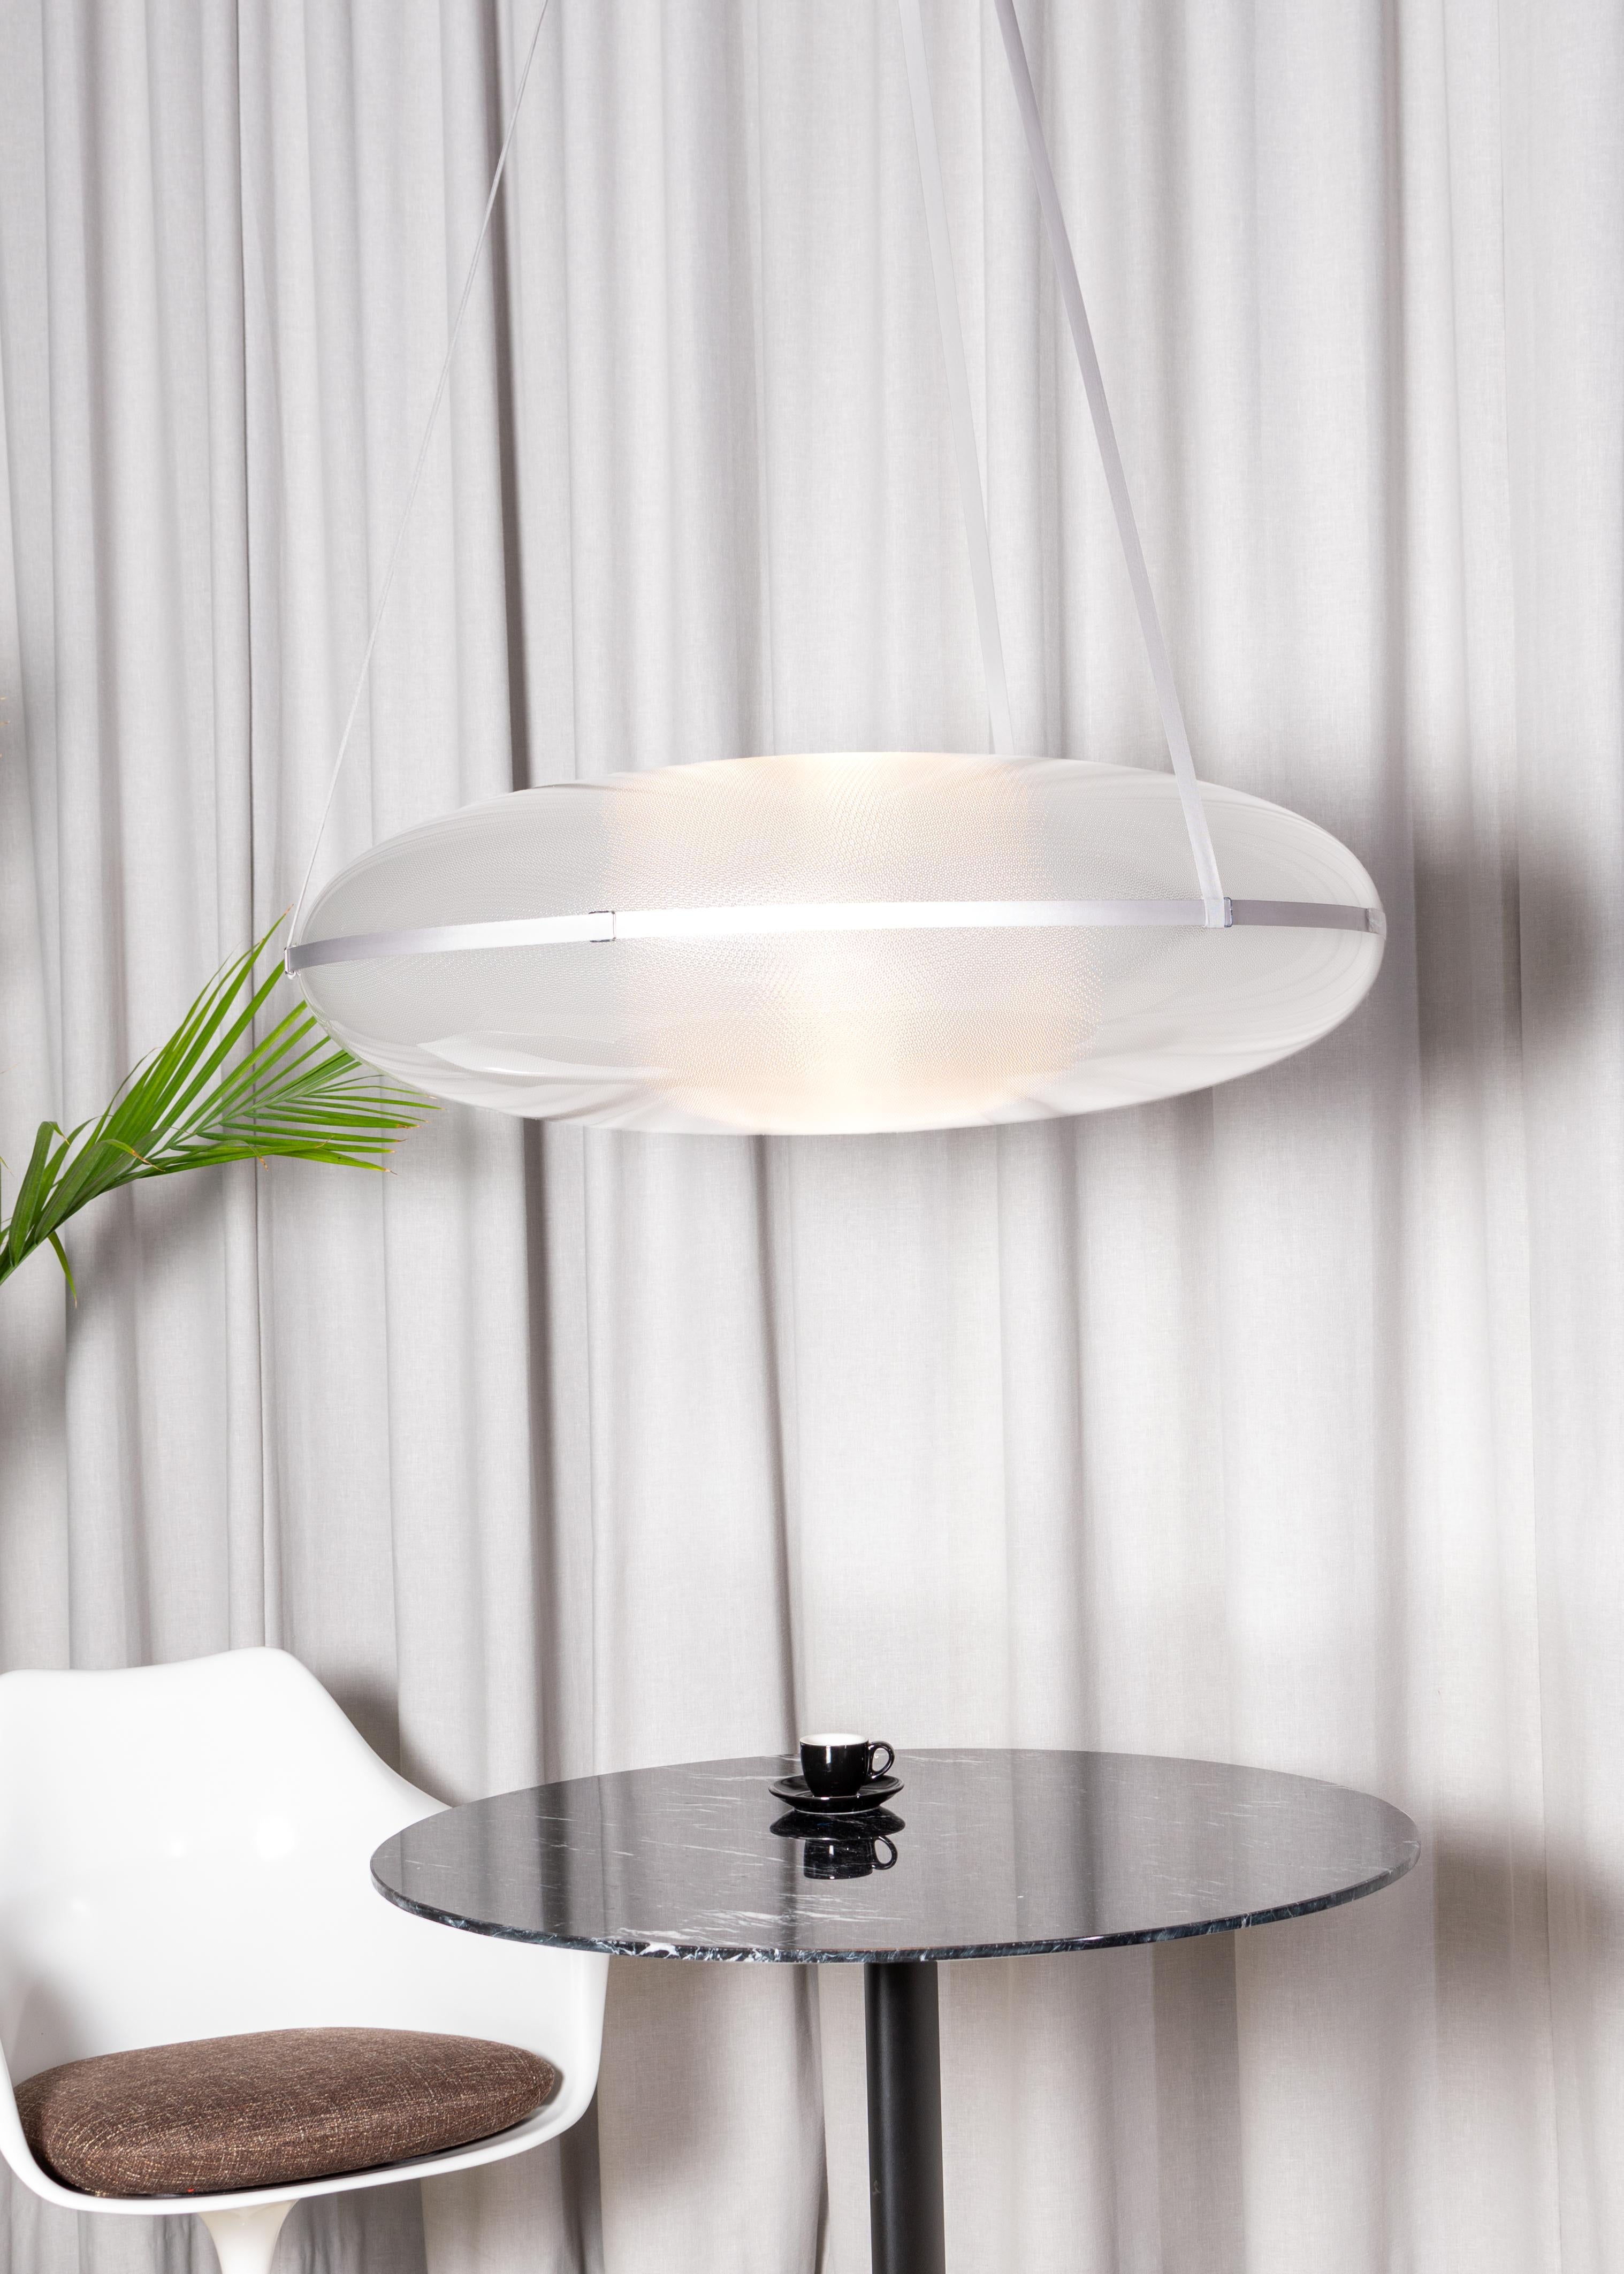 Contemporary pendant lamp 'Iris'

Electrical : 
Voltage: 120 V – 277 V 
Lamp: Integral 34 W 35 V DC LED

The model shown in picture:
- Diameter: 90 cm Height. 60 cm 
- Finish: Silver
- Wire height: 300 cm (adjustable drop length)
- Modules :